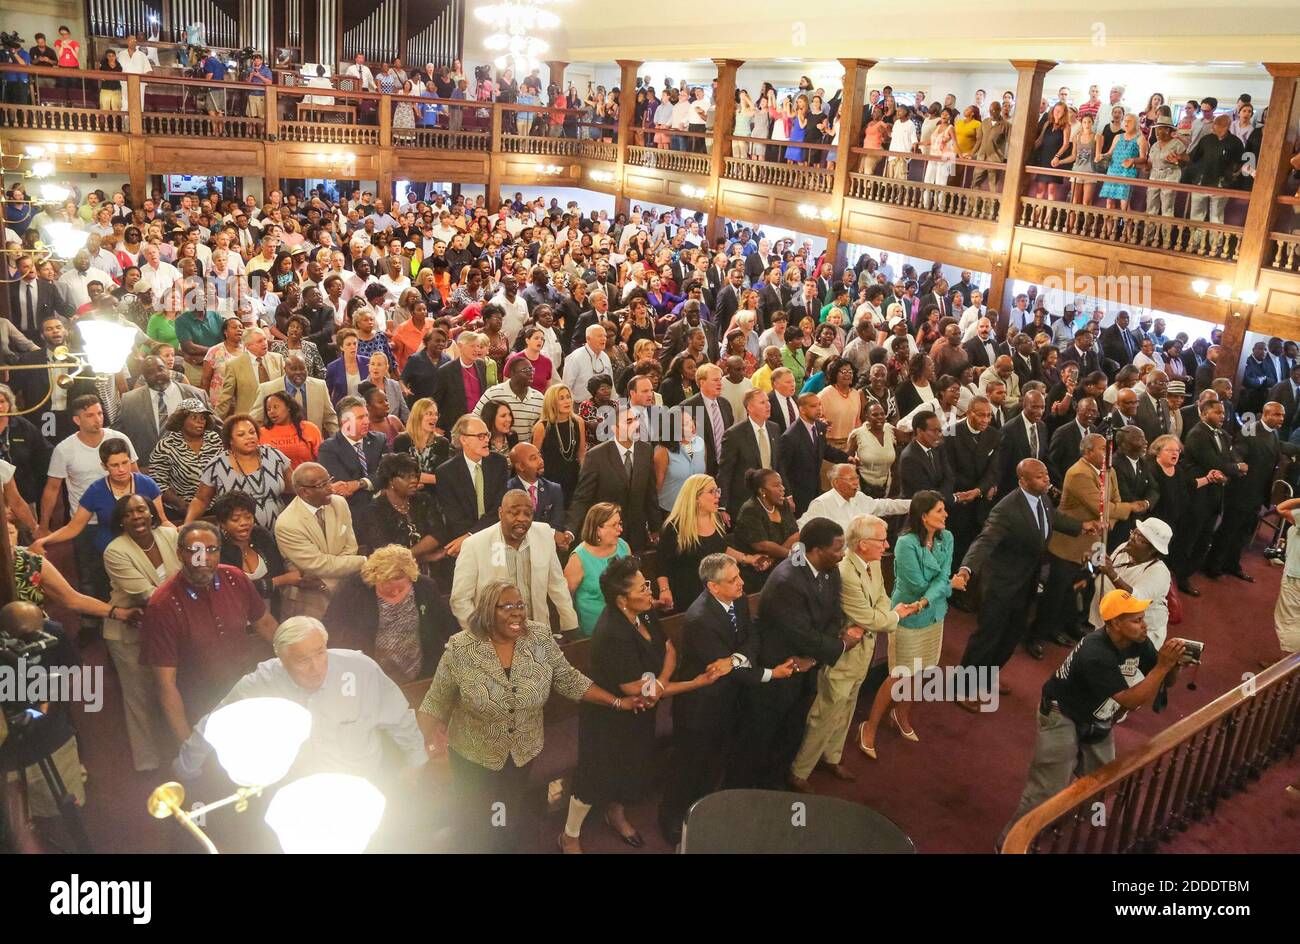 NO FILM, NO VIDEO, NO TV, NO DOCUMENTARY - A prayer vigil is held at Morris Brown AME Church on June 18, 2015 for the nine people who were killed by a gunman in Emanuel AME Church in Charleston, SC, USA. Photo by Tim Dominick/The State/TNS/ABACAPRESS.COM Stock Photo